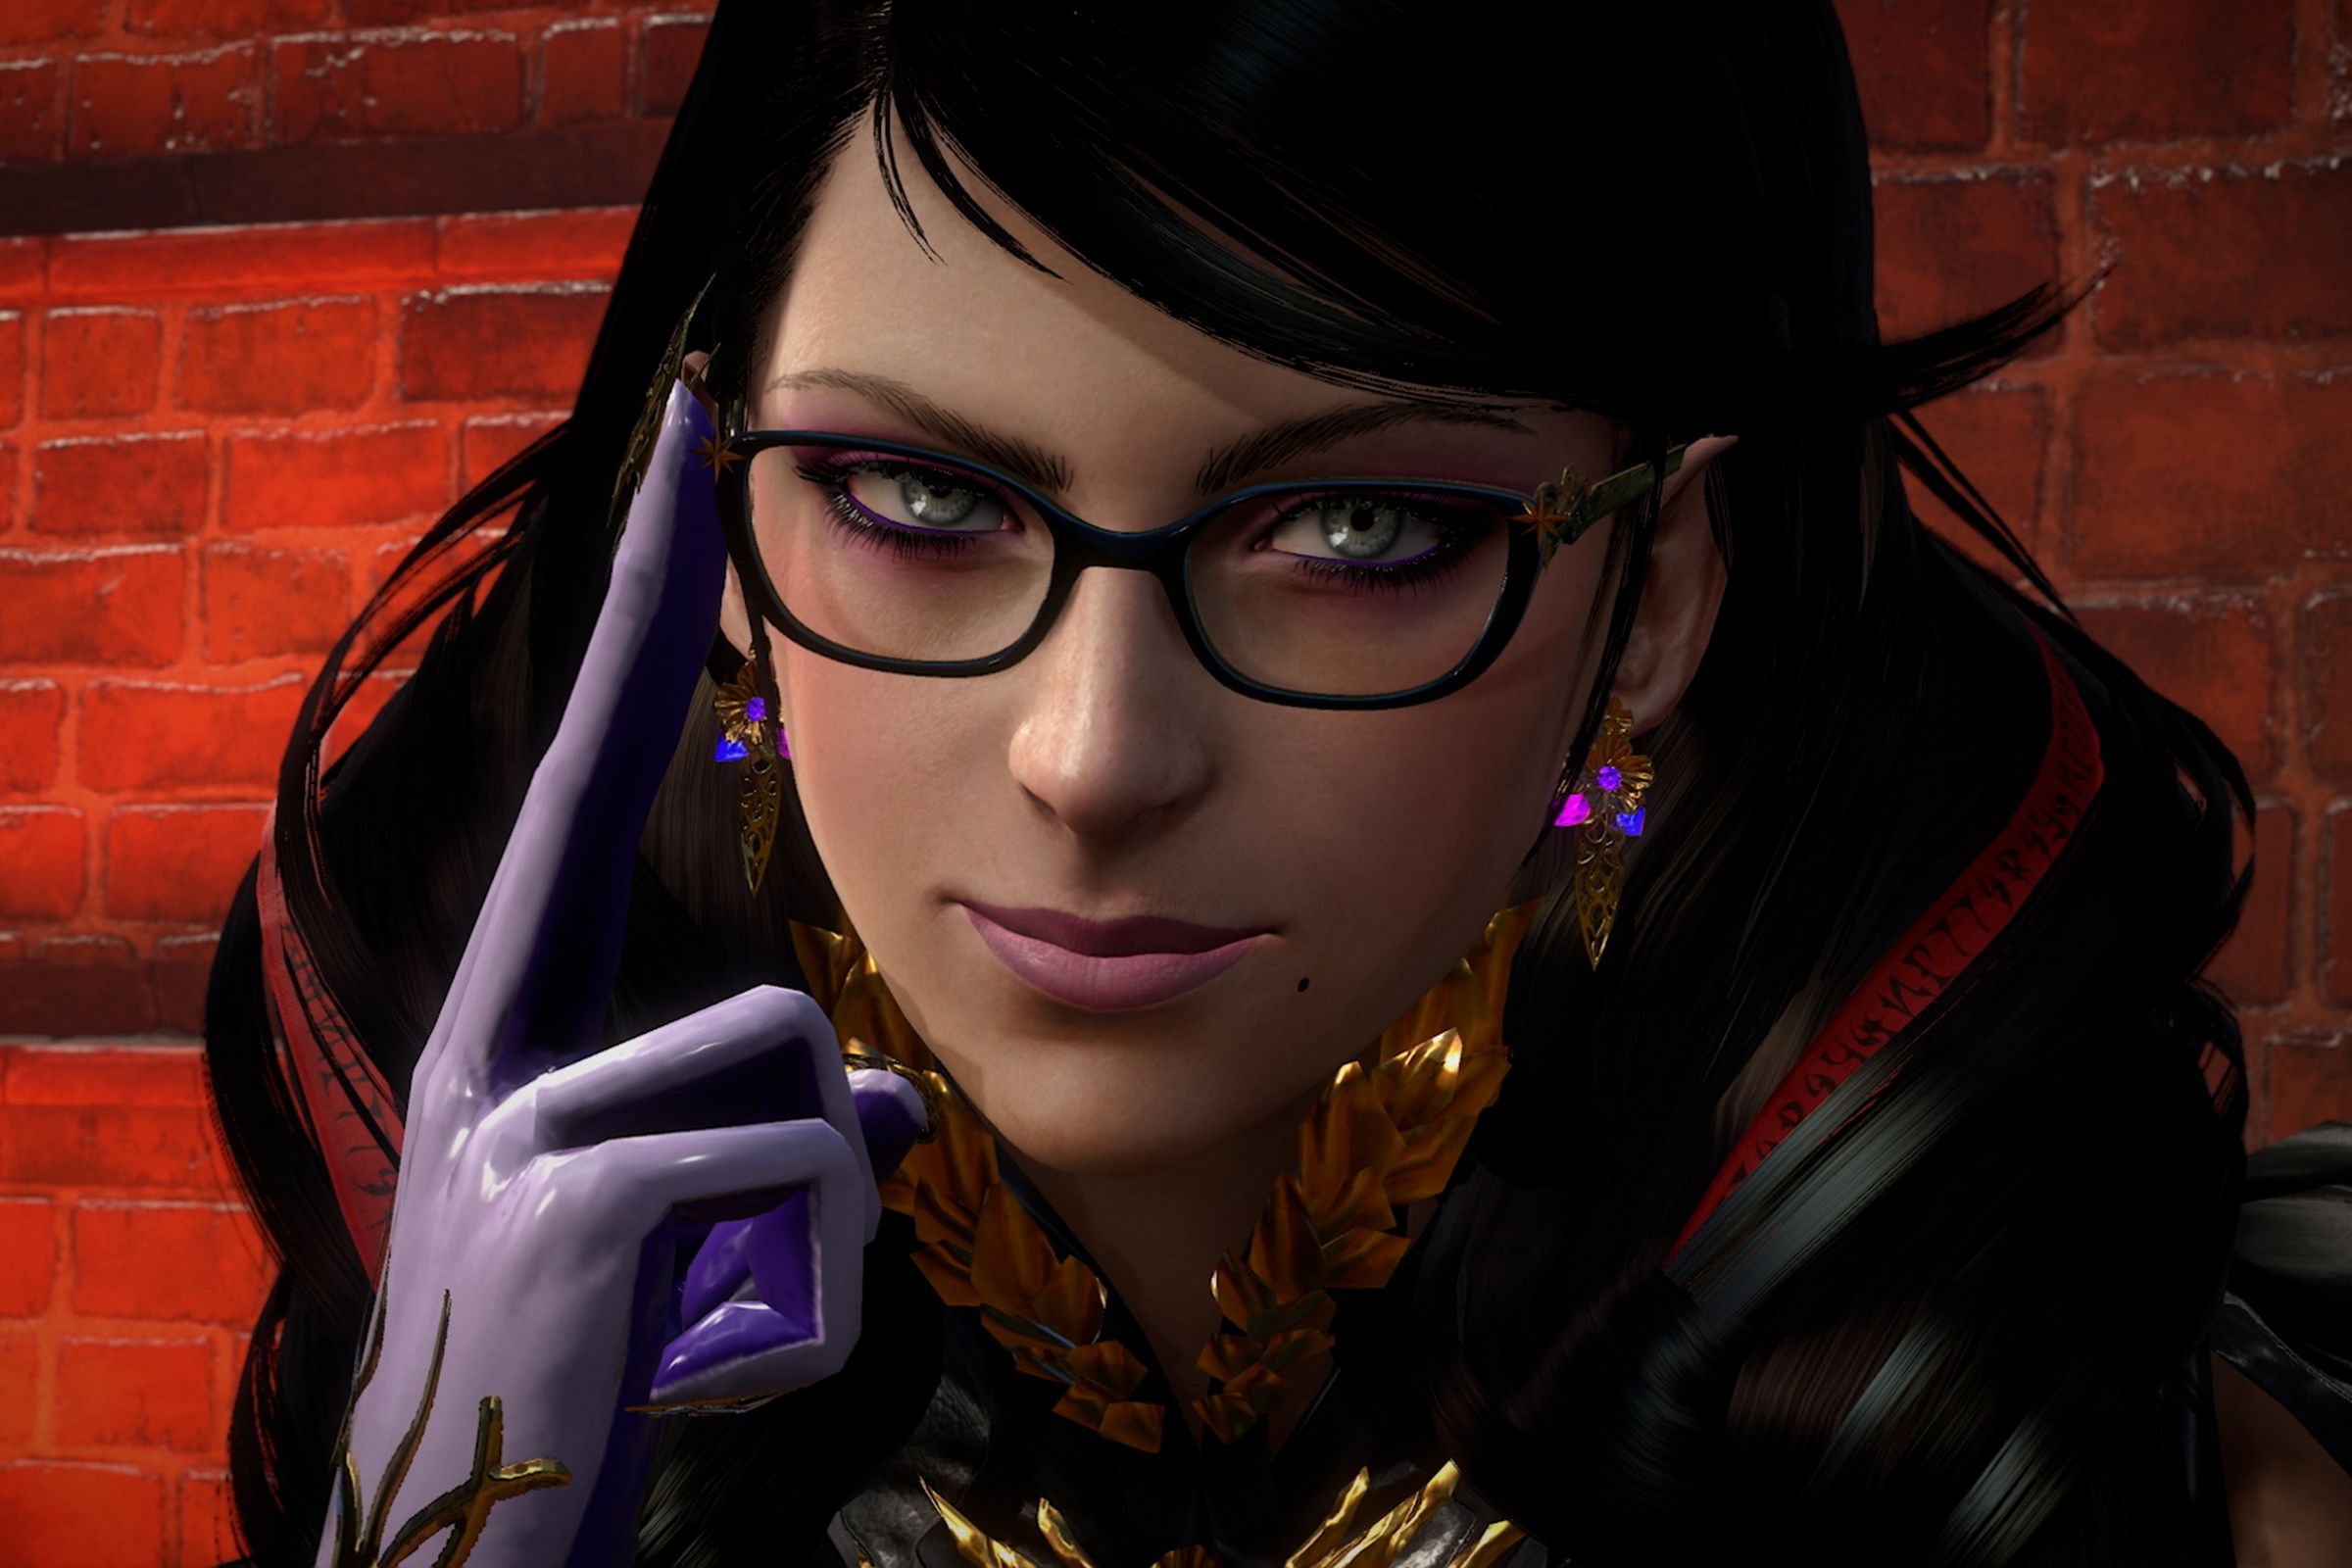 Screenshot from Bayonetta 3 featuring an extreme close-up of Bayonetta’s face with black hair and black rimmed glasses pushed up with a white-gloved hand